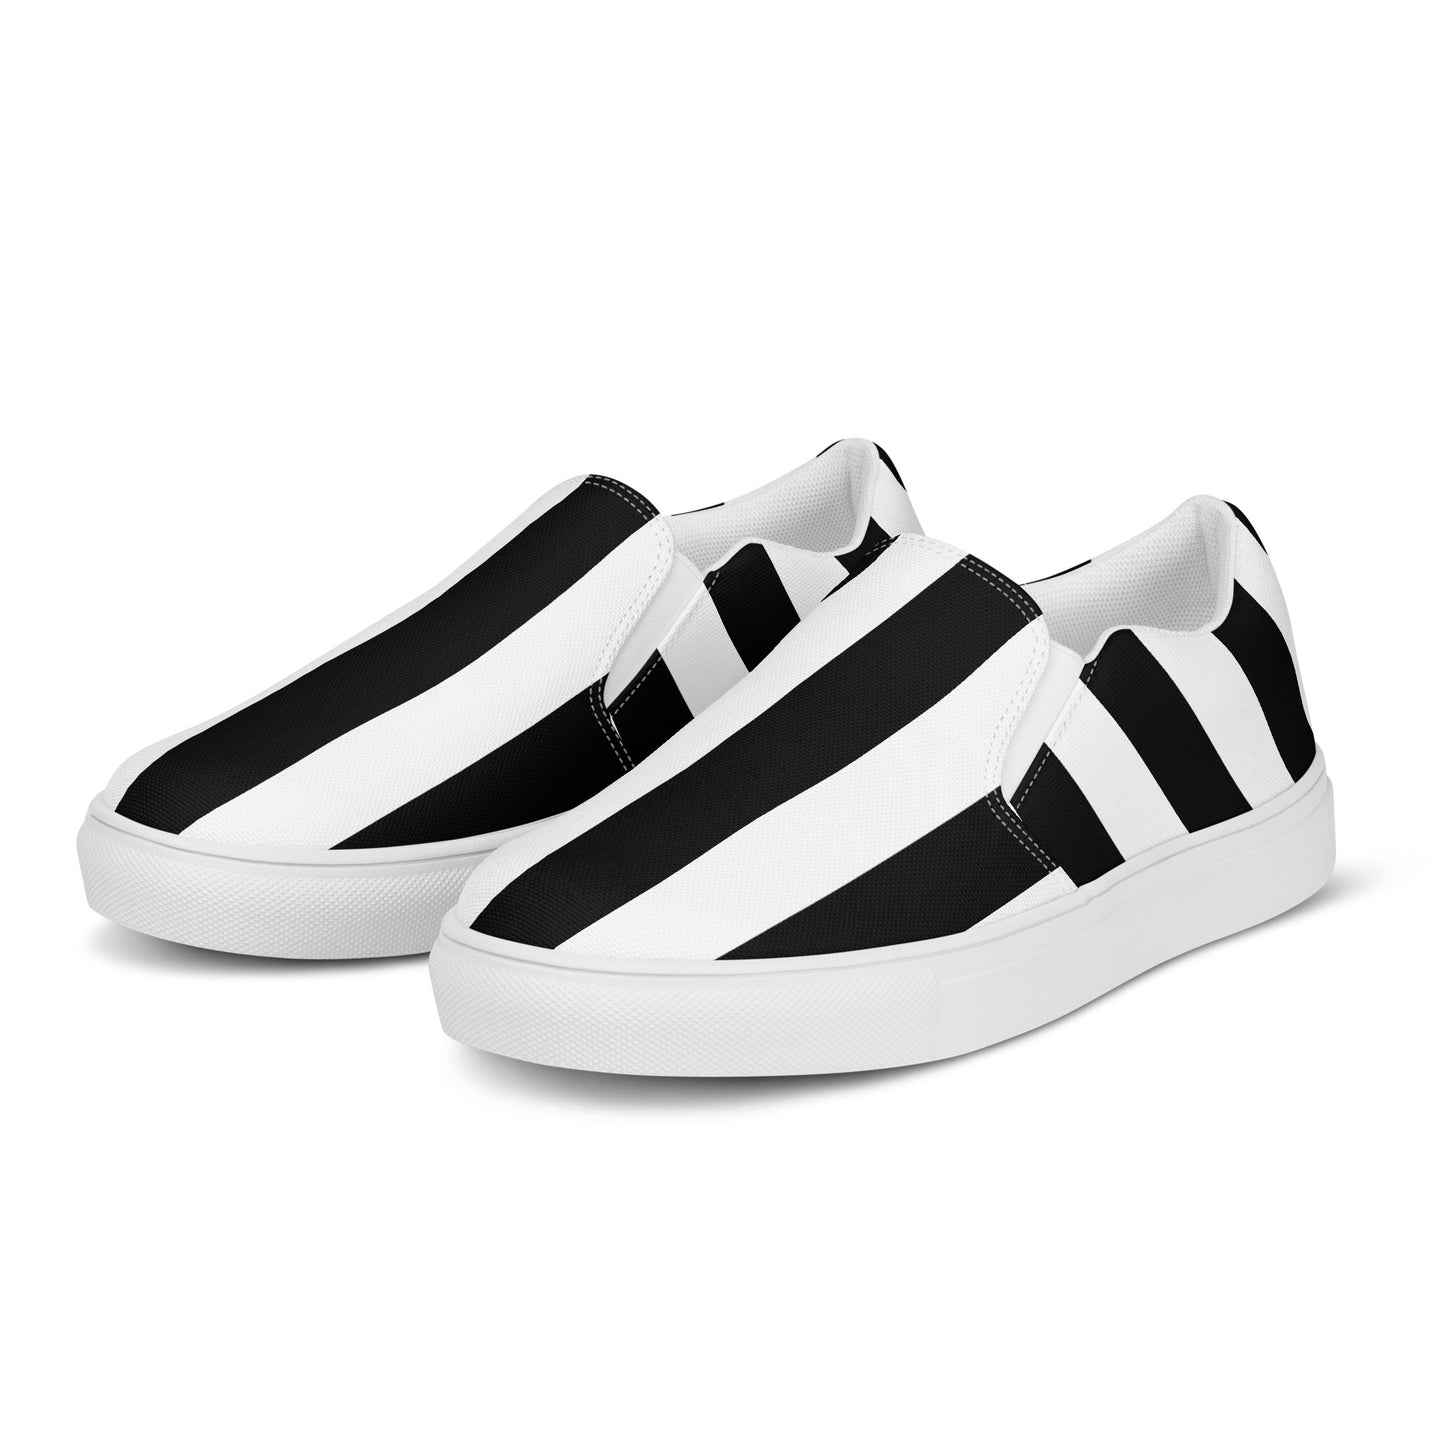 Black & White Mark Stripe Women’s Canvas Slip-On Flat Deck Shoe | Pinup Couture Relaxed